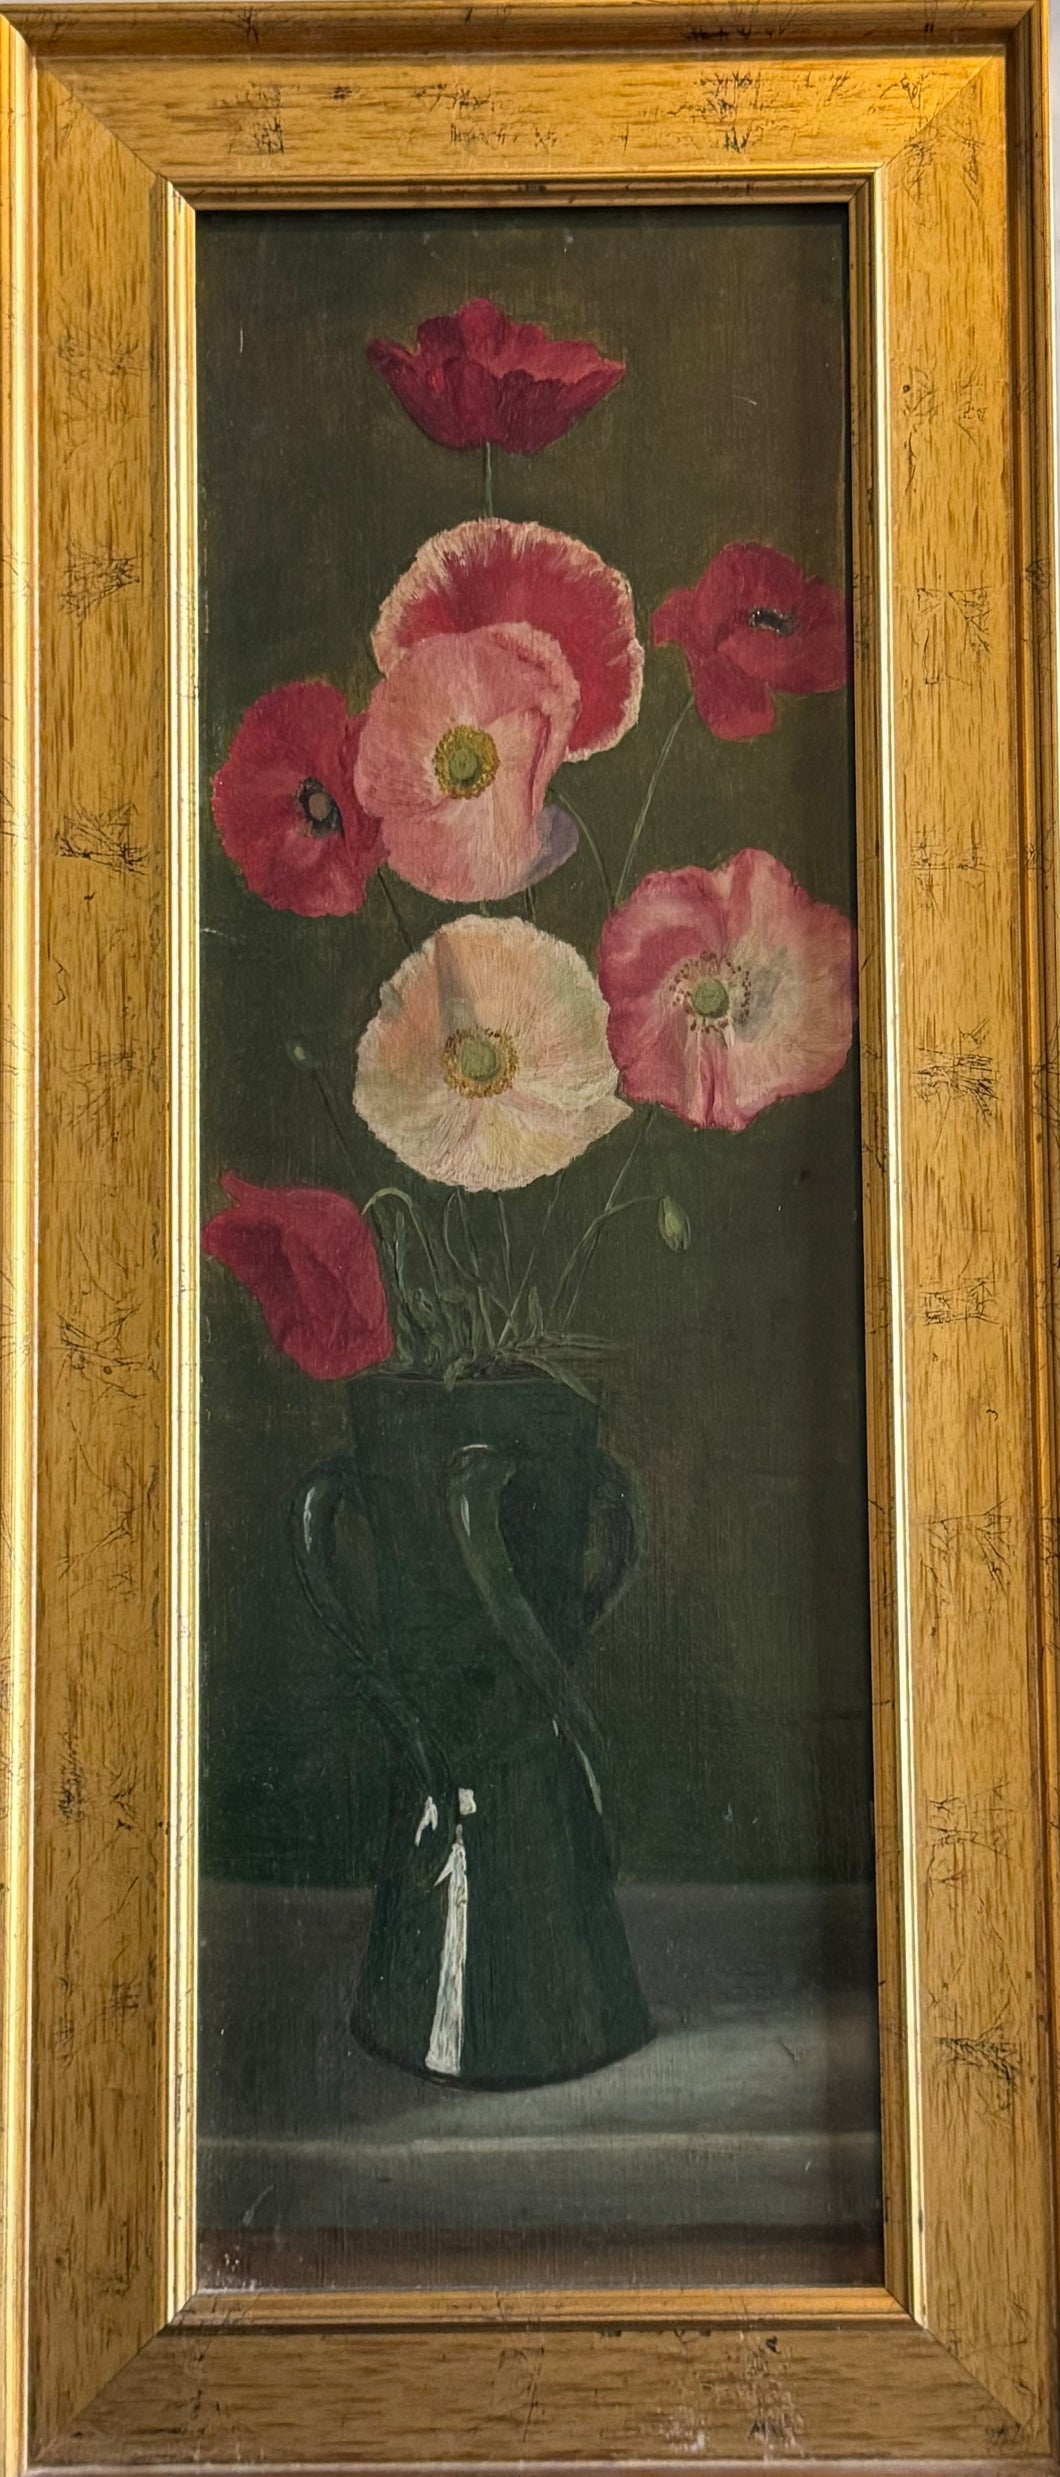 Oil painting on board: Poppies in an art pottery vase